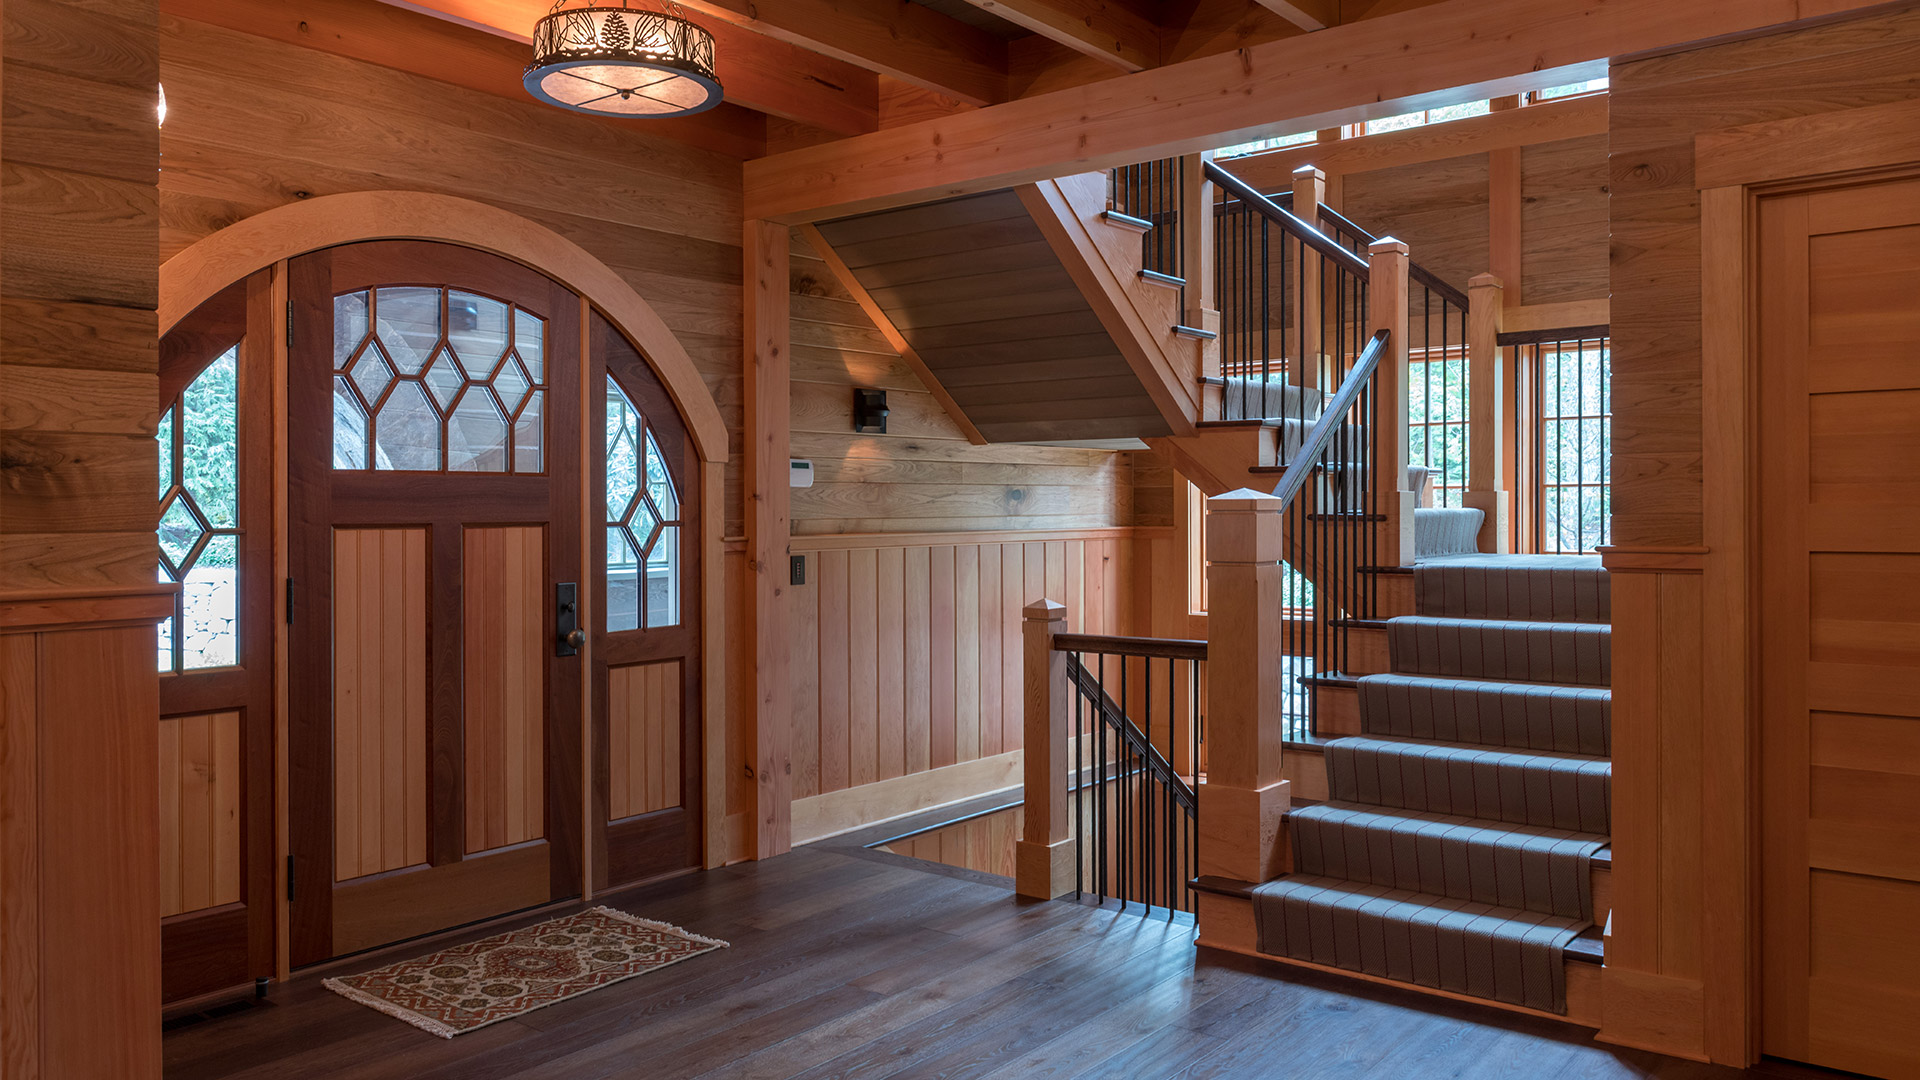 Alton, New Hampshire arched entry door and custom staircase